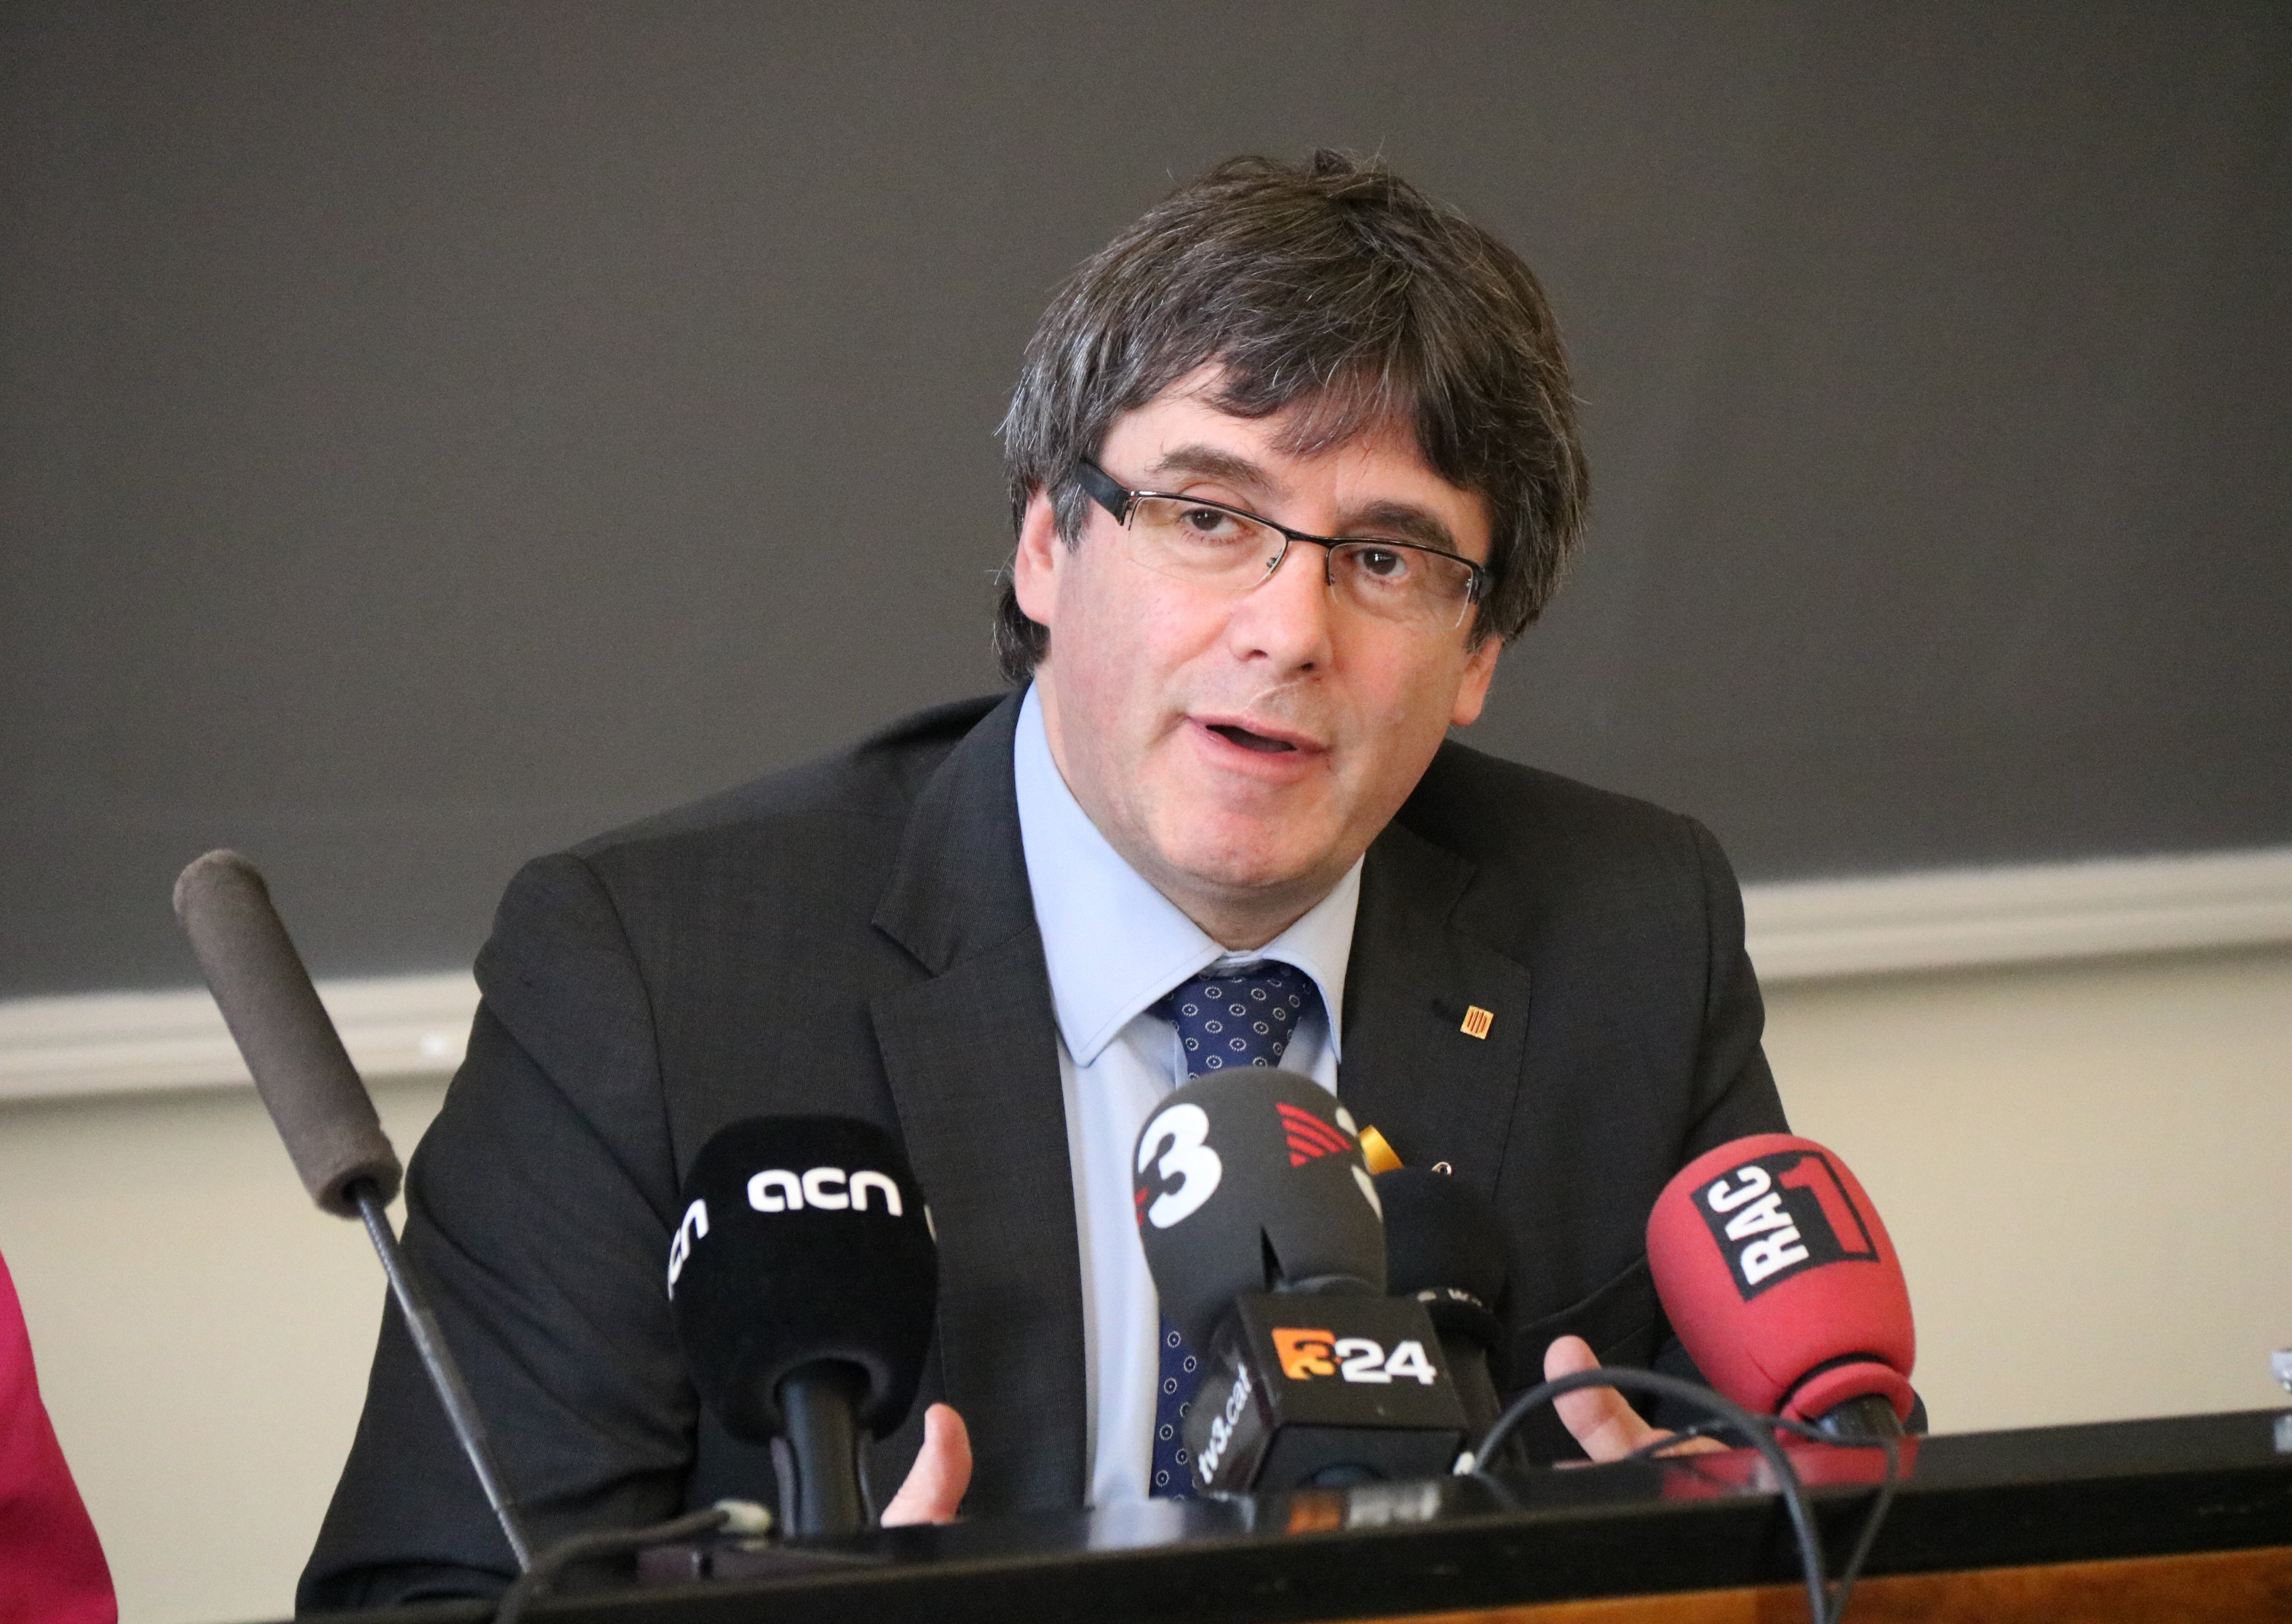 German judge in first Puigdemont hearing says extradition may be "inadmissible"